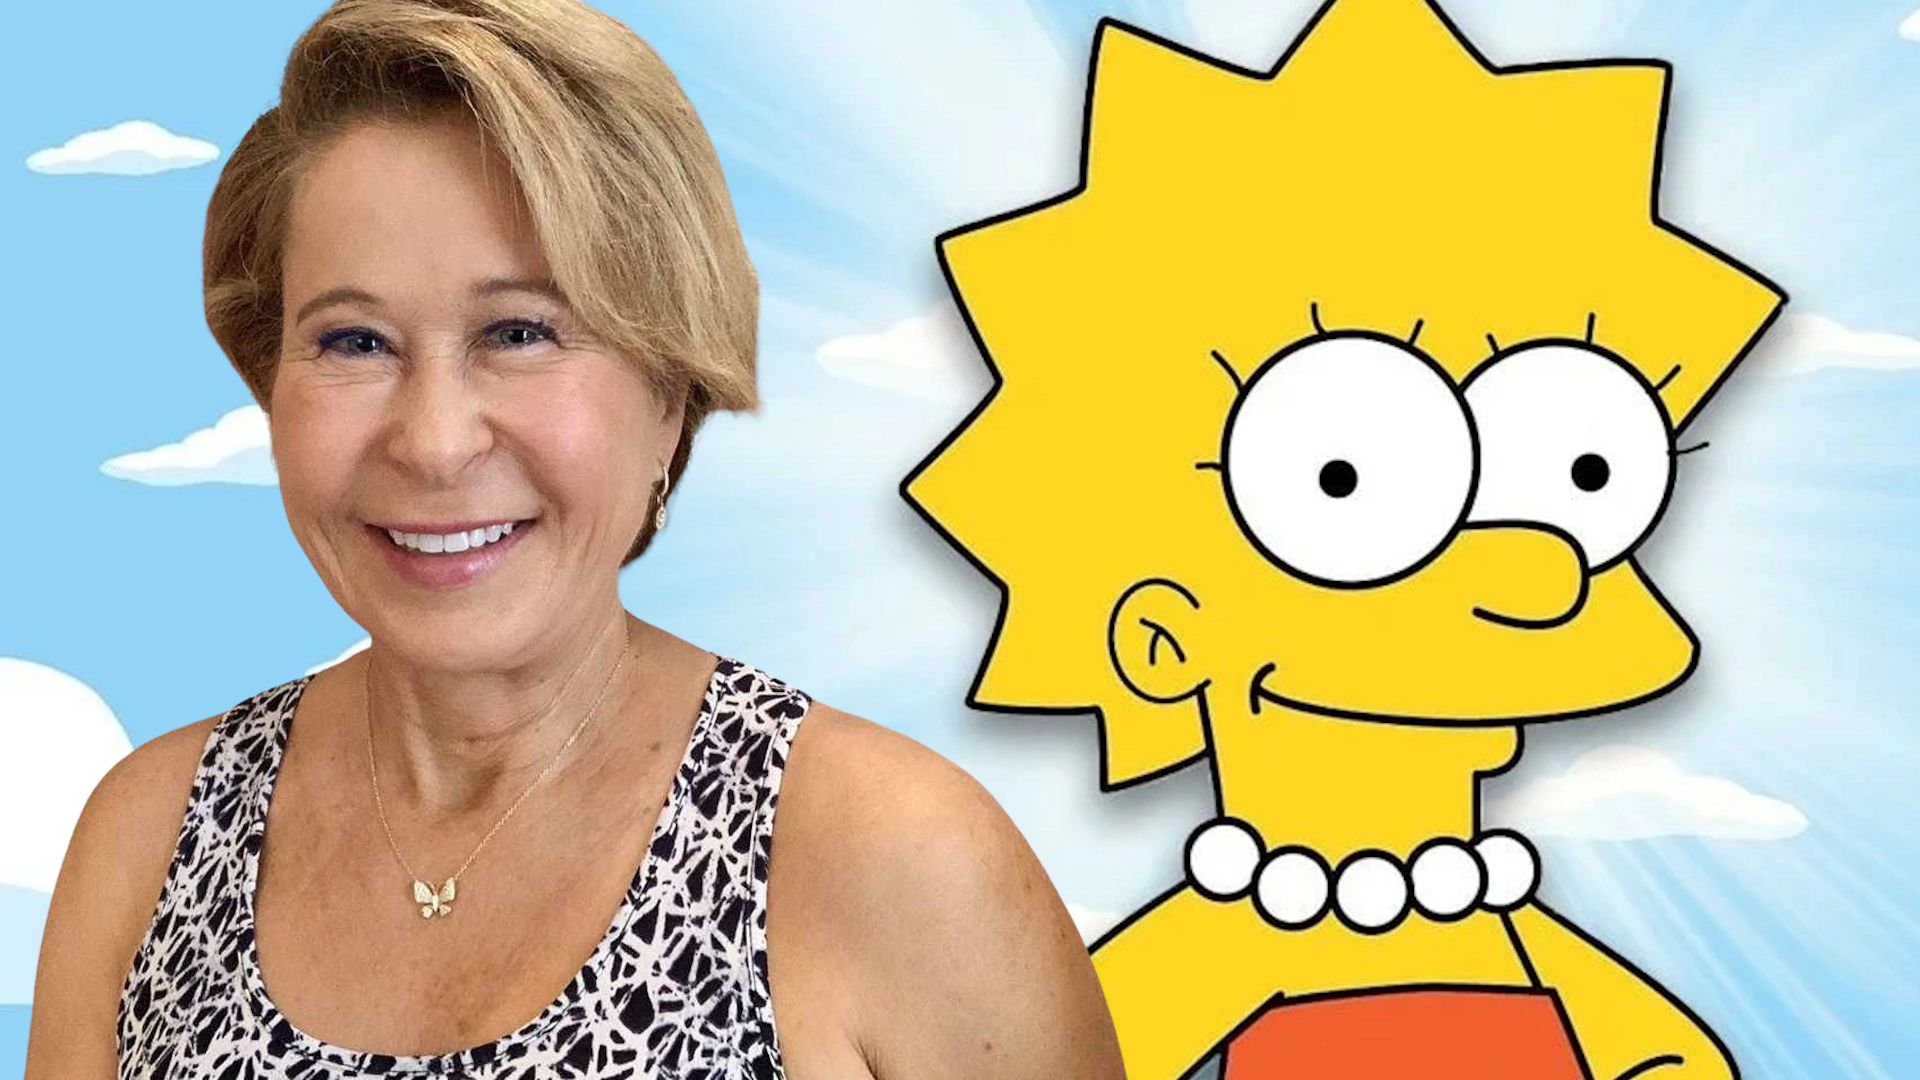 Actress Yeardley Smith superimposed over a picture of Lisa Simpson from The Simpsons